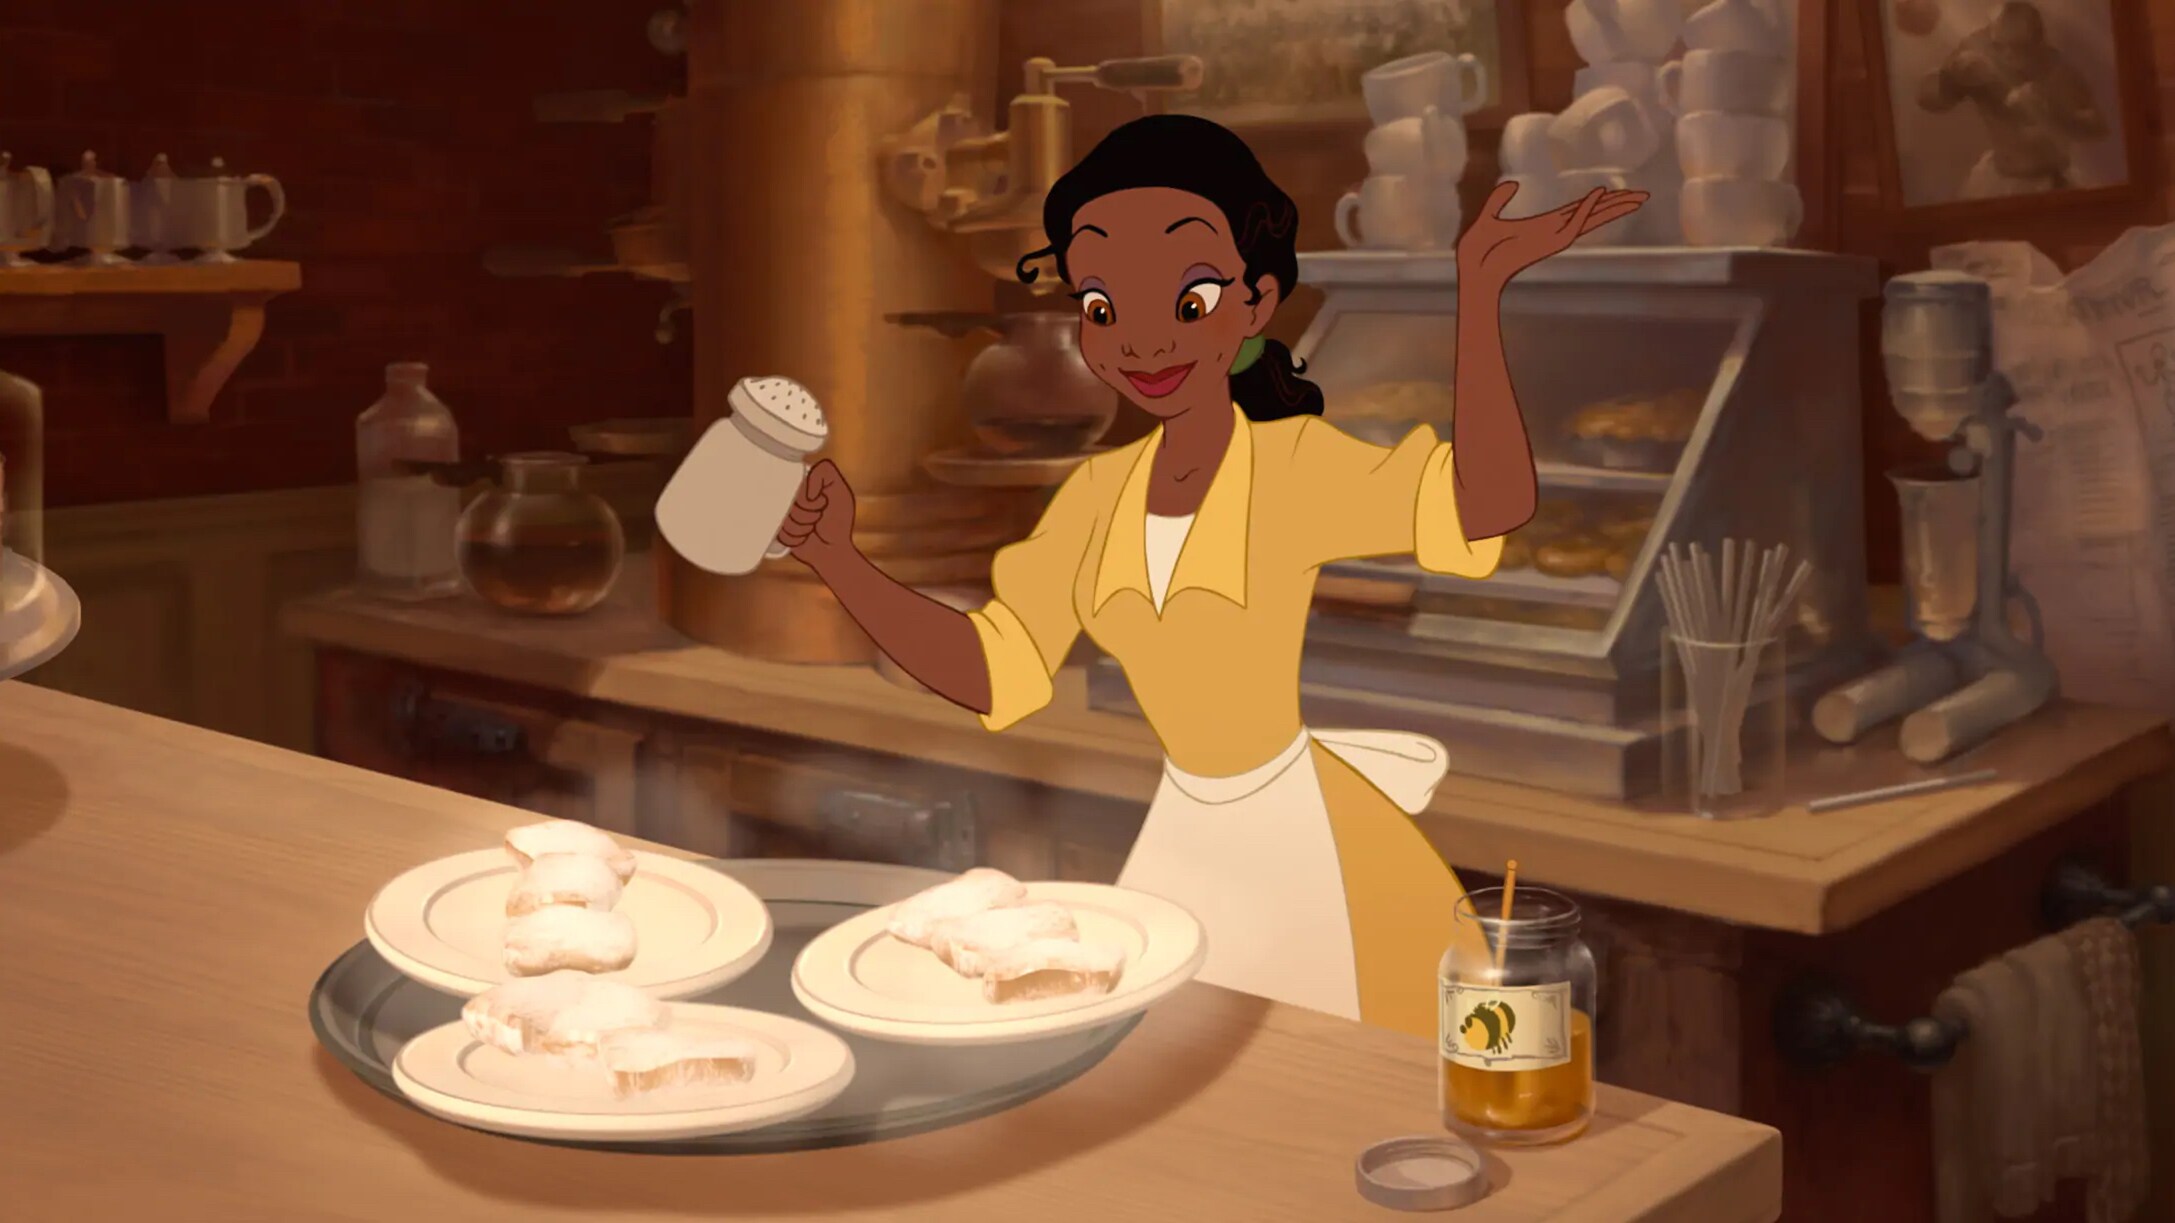 Tiana putting the final touches on her beignets.